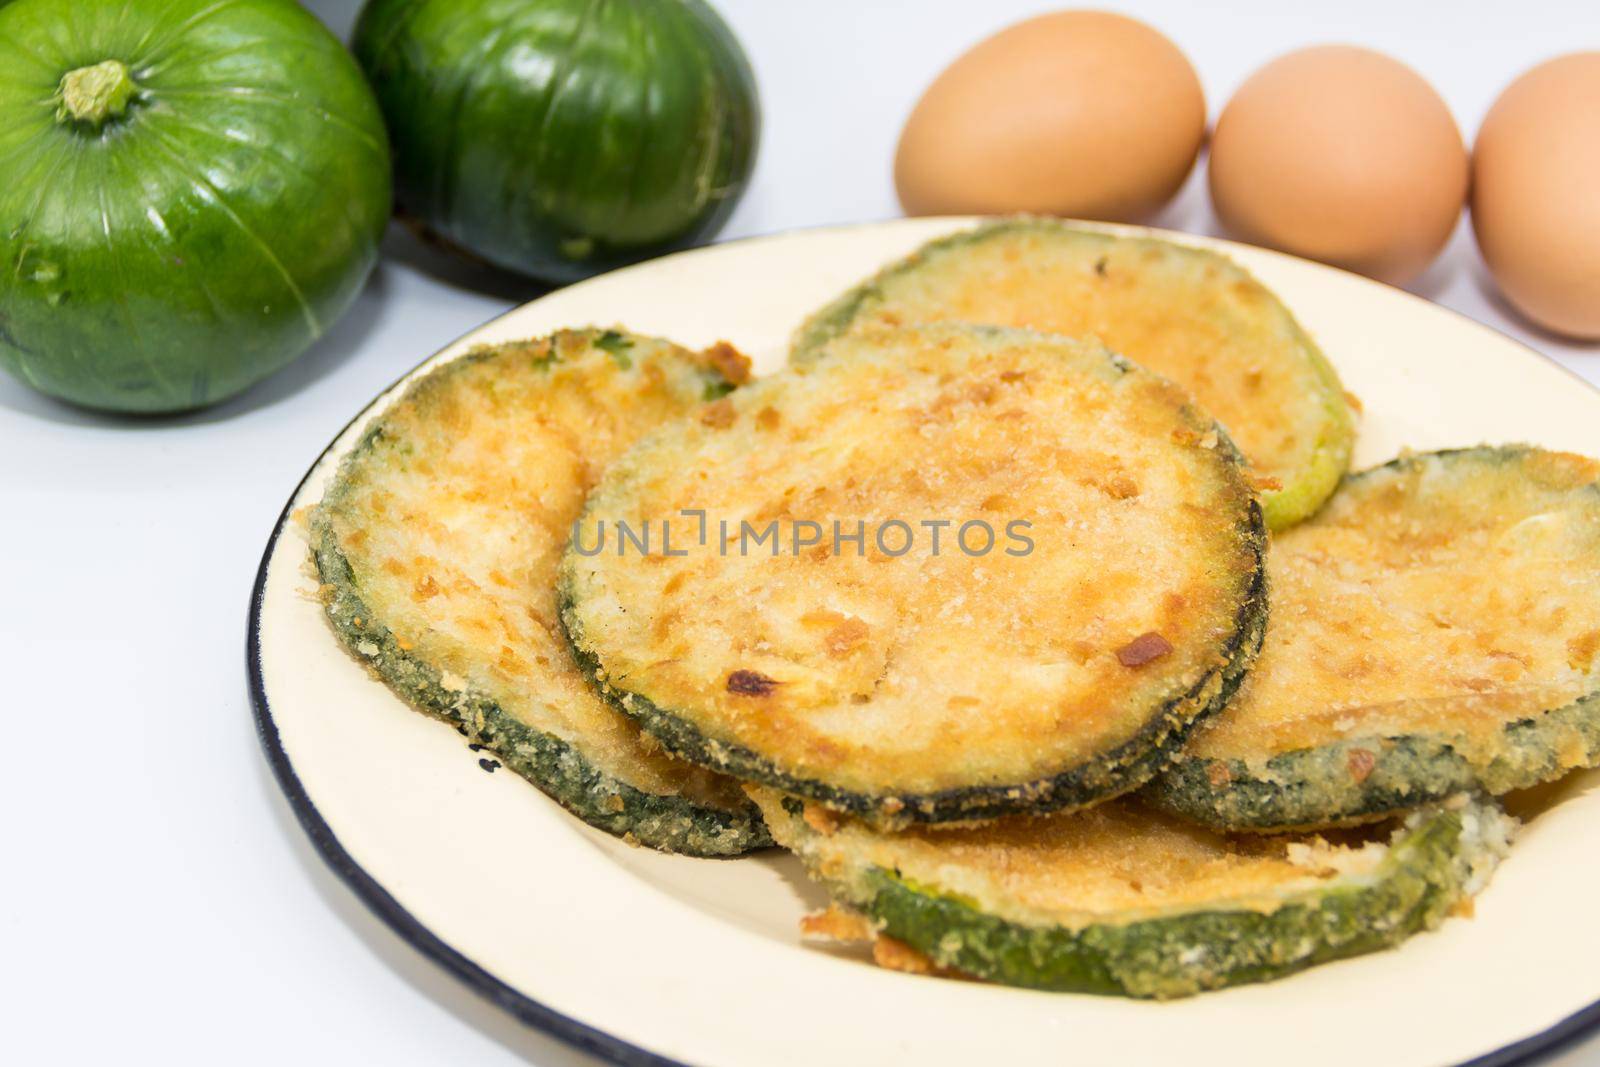 Trunk zucchini in baked or fried milanesas, Argentine cuisine